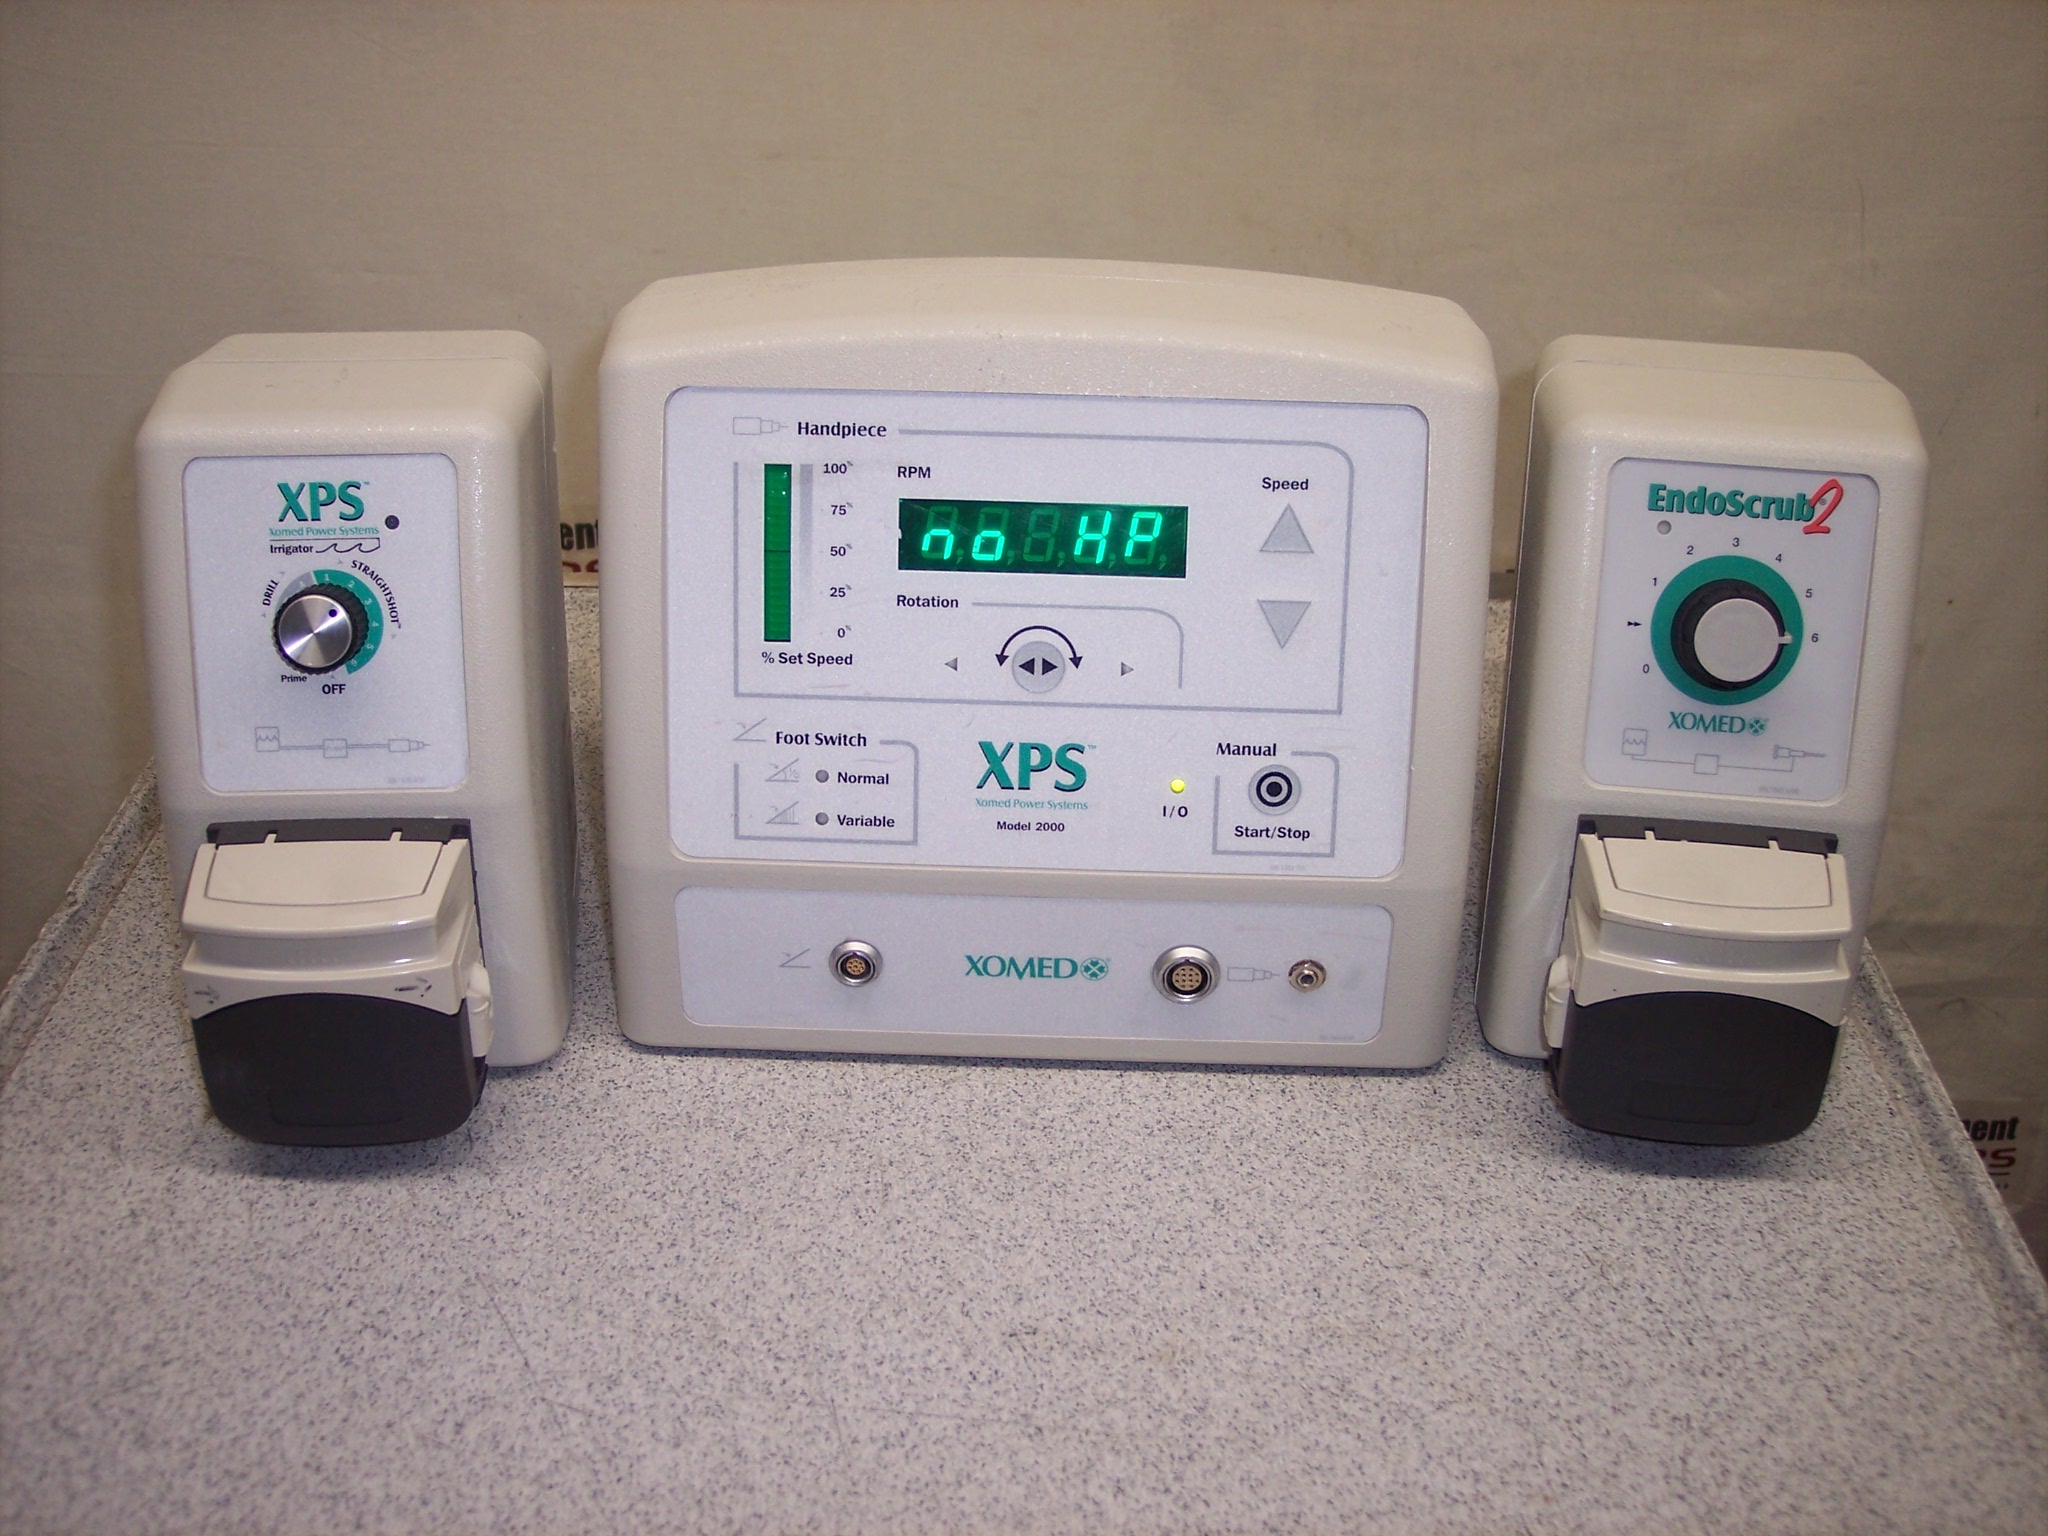 Xomed 2000 XPS Microresector Console w/ XPS Irrigator and Endoscrub 2 